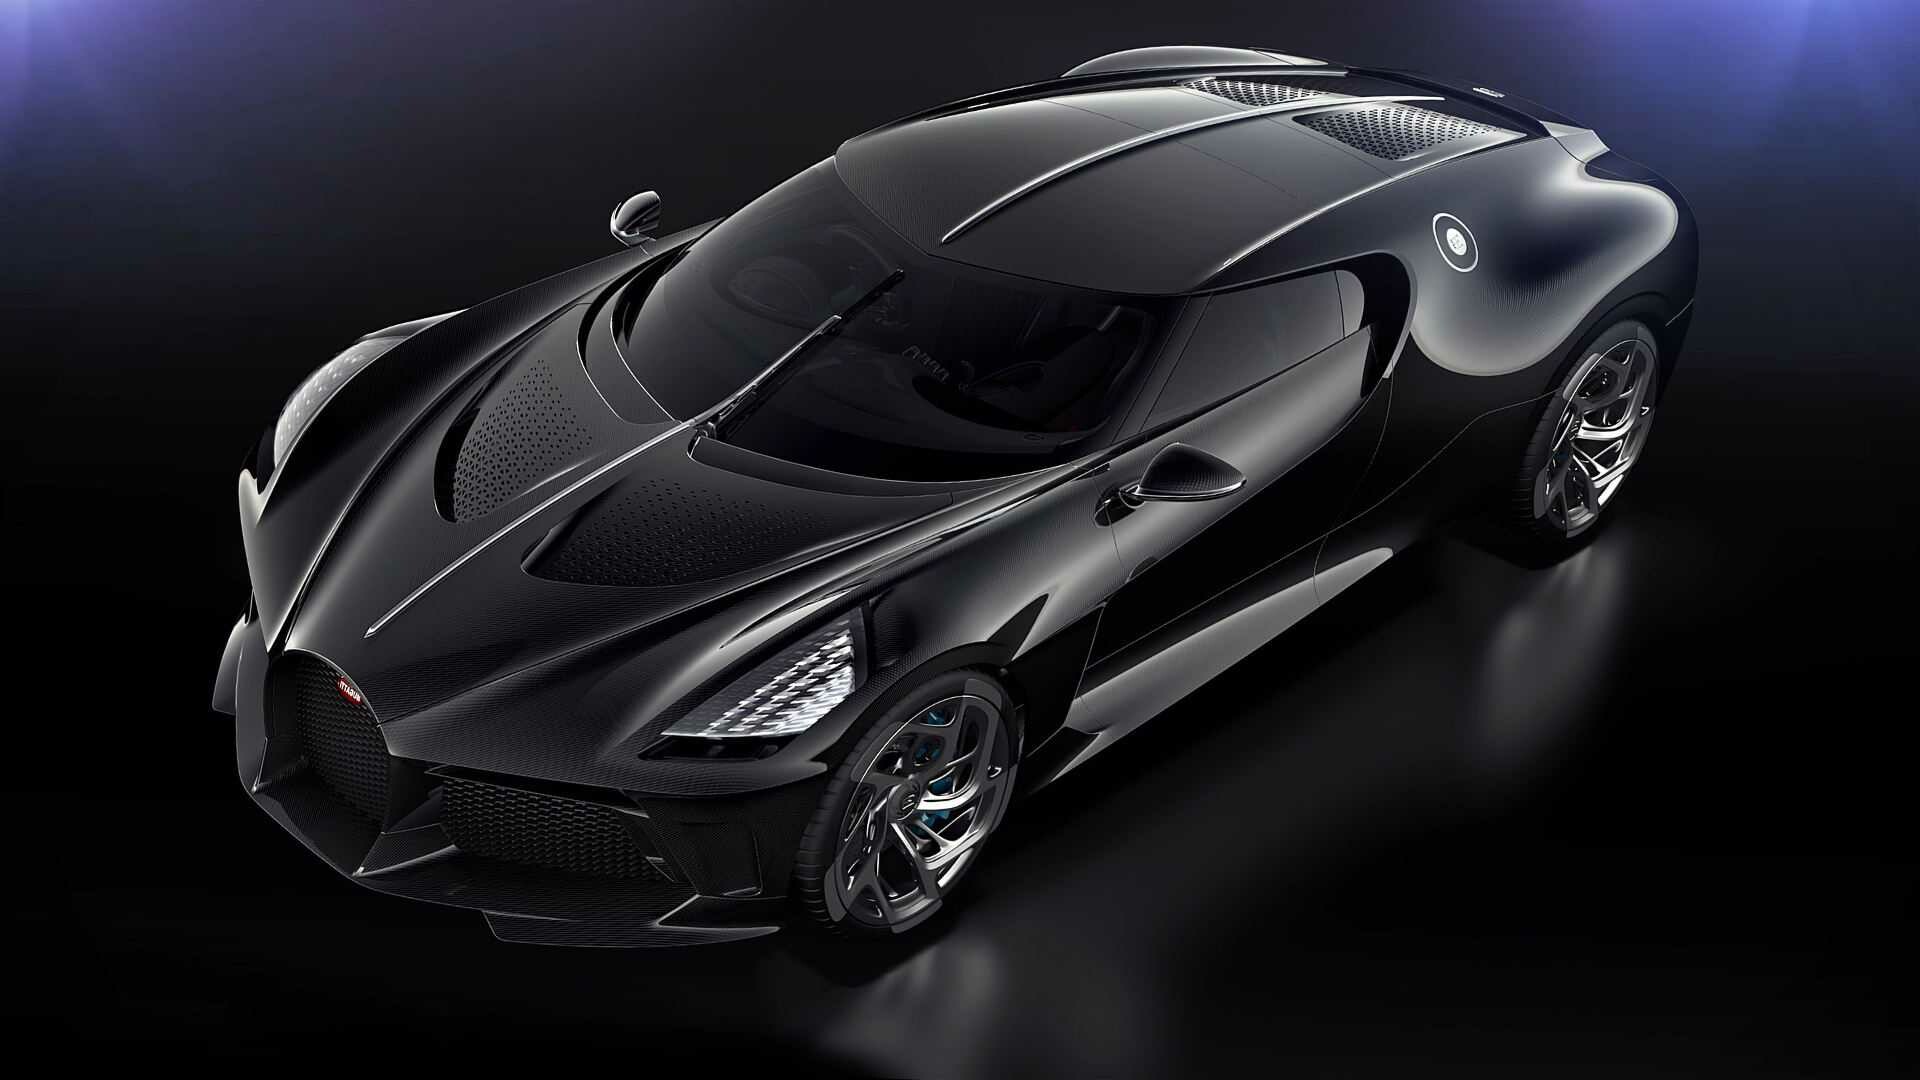 Bugatti La Voiture Noire: The name of the car is a French for "The Black Car", Exclusive supercar. 1920x1080 Full HD Background.